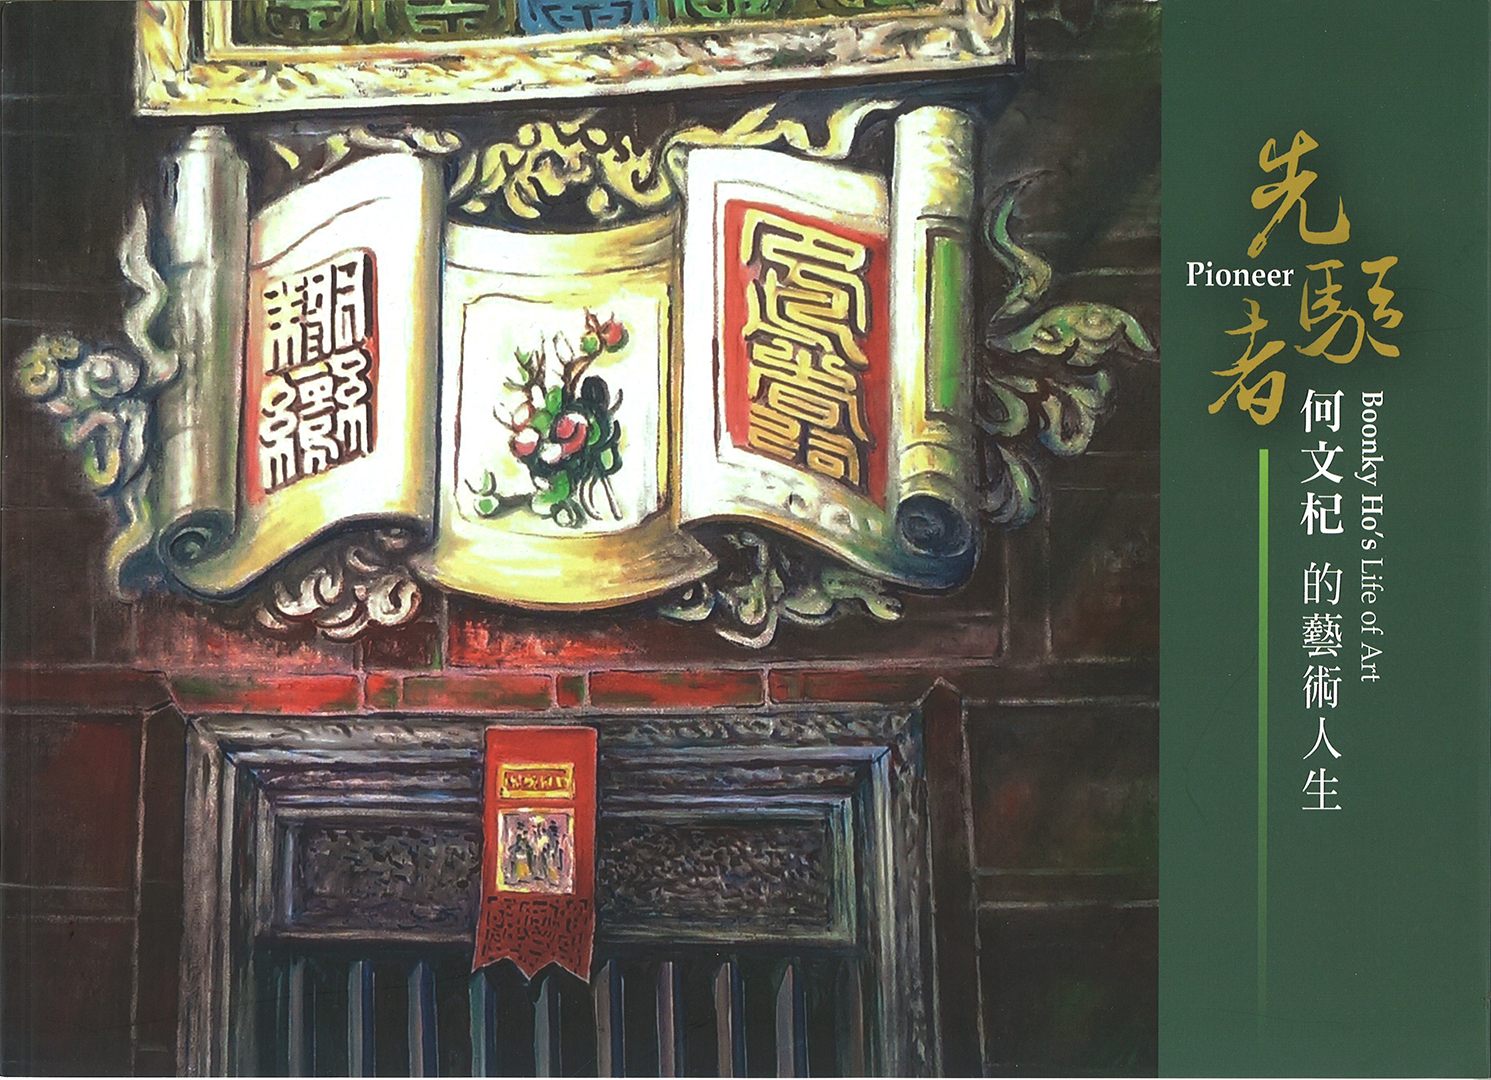 ‘The Pioneer - Wenqi He’s Artistic Life’ 展示圖